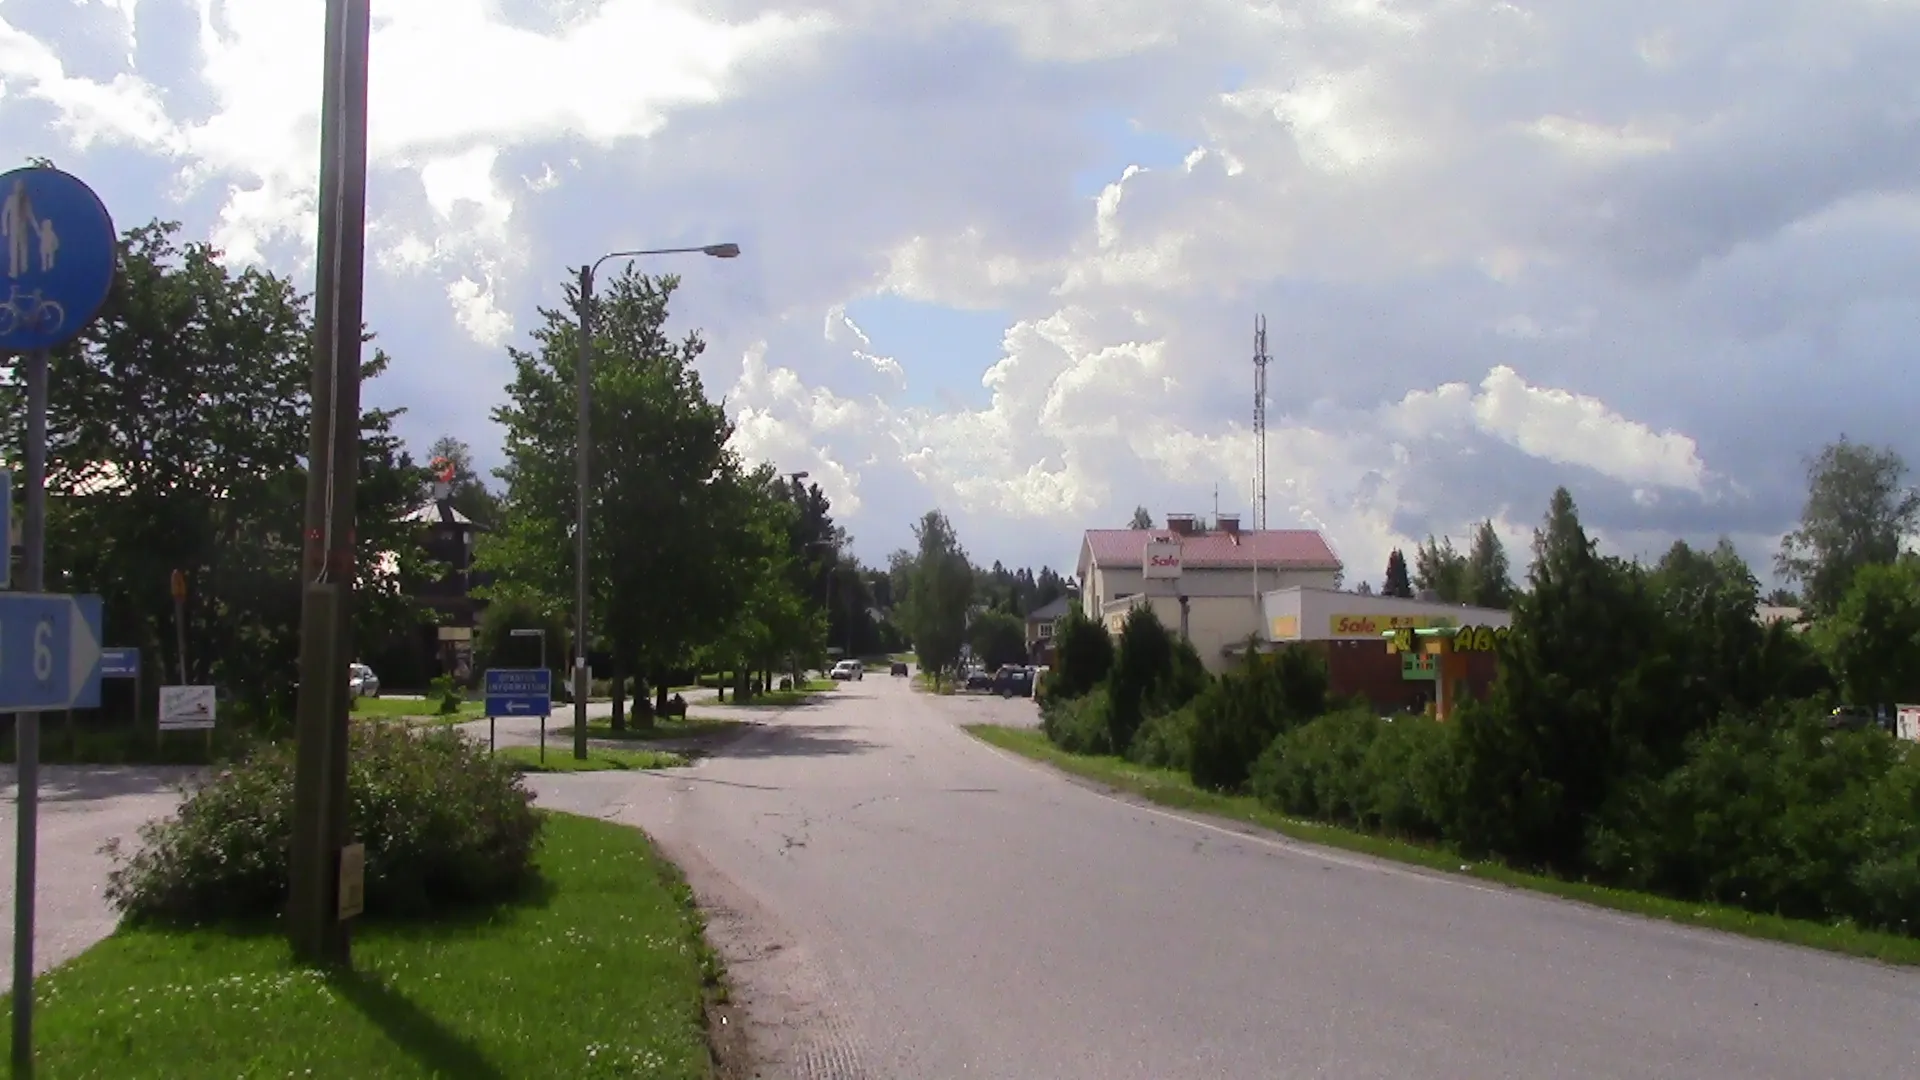 Photo showing: The village of Yläne seen from the crossing of Haaviontie, Haverintie and Keskustie.